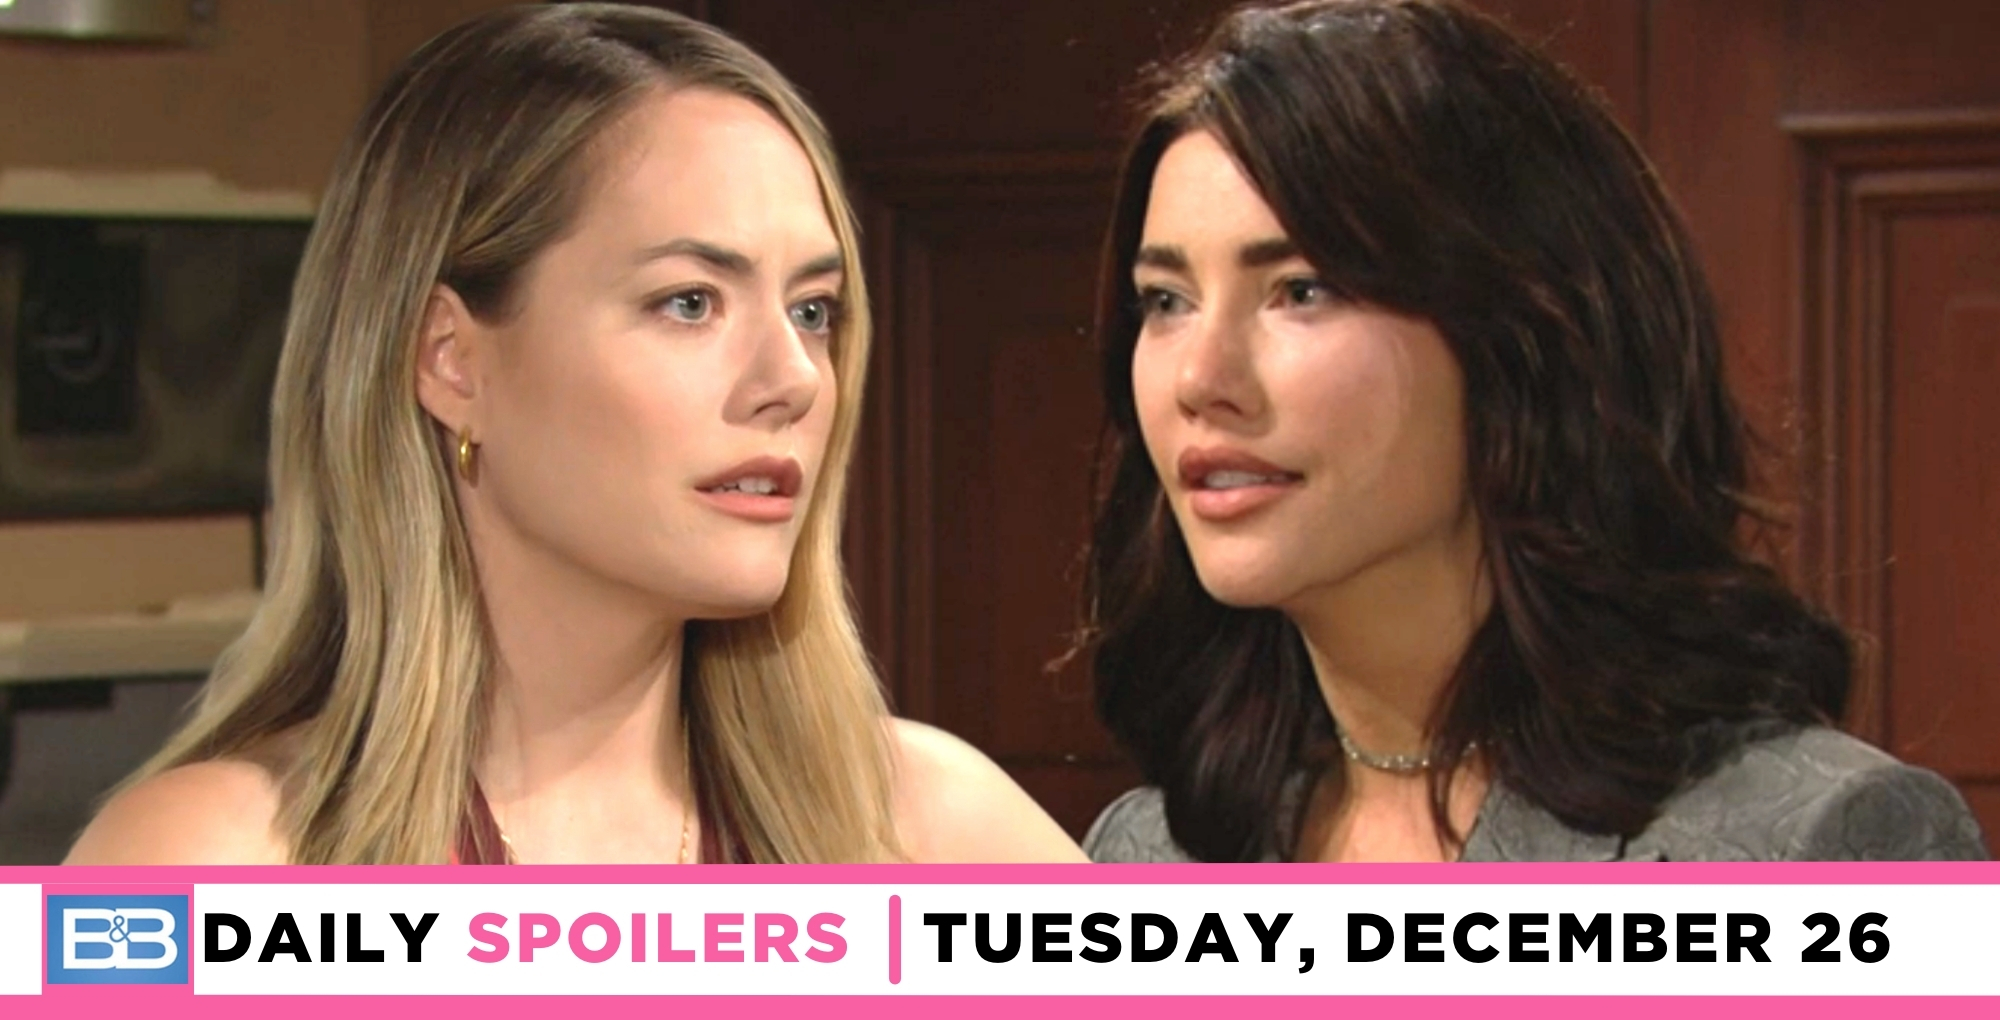 hope logan answers to steffy forrester finnegan on the bold and the beautiful spoilers for tuesday, december 26, 2023, episode 9175.